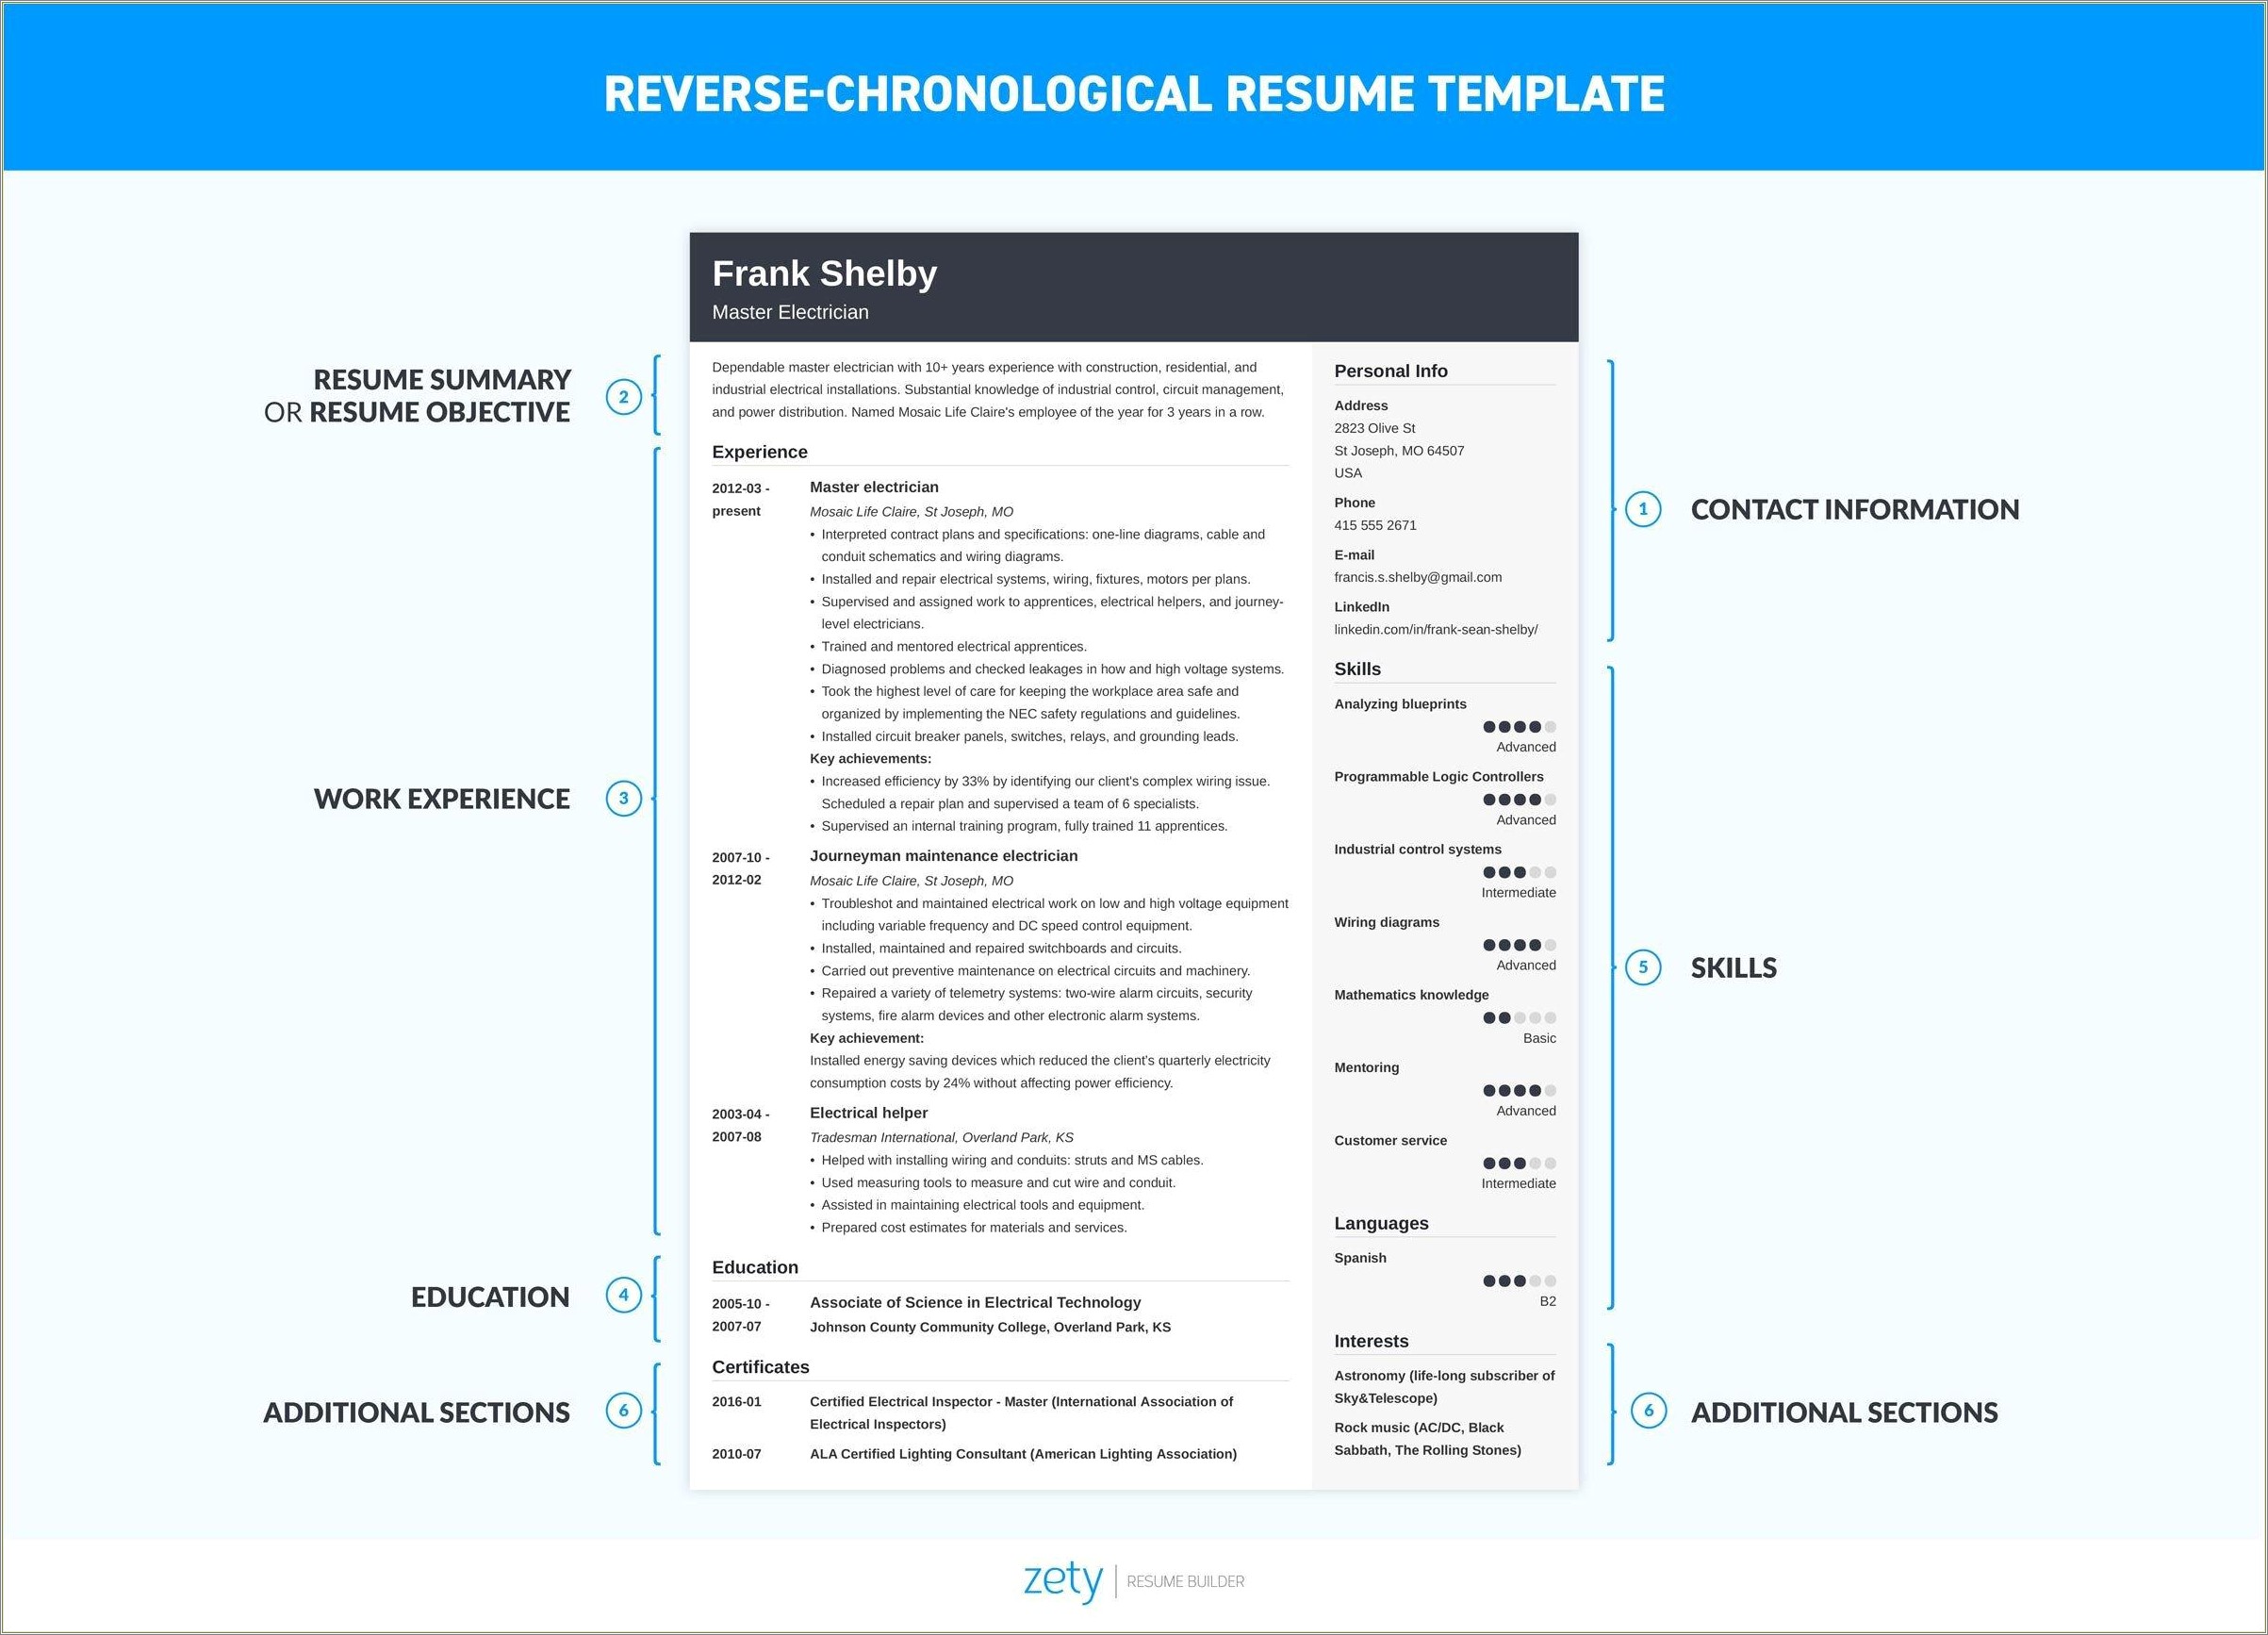 Prepare Your Resume To Apply For Job